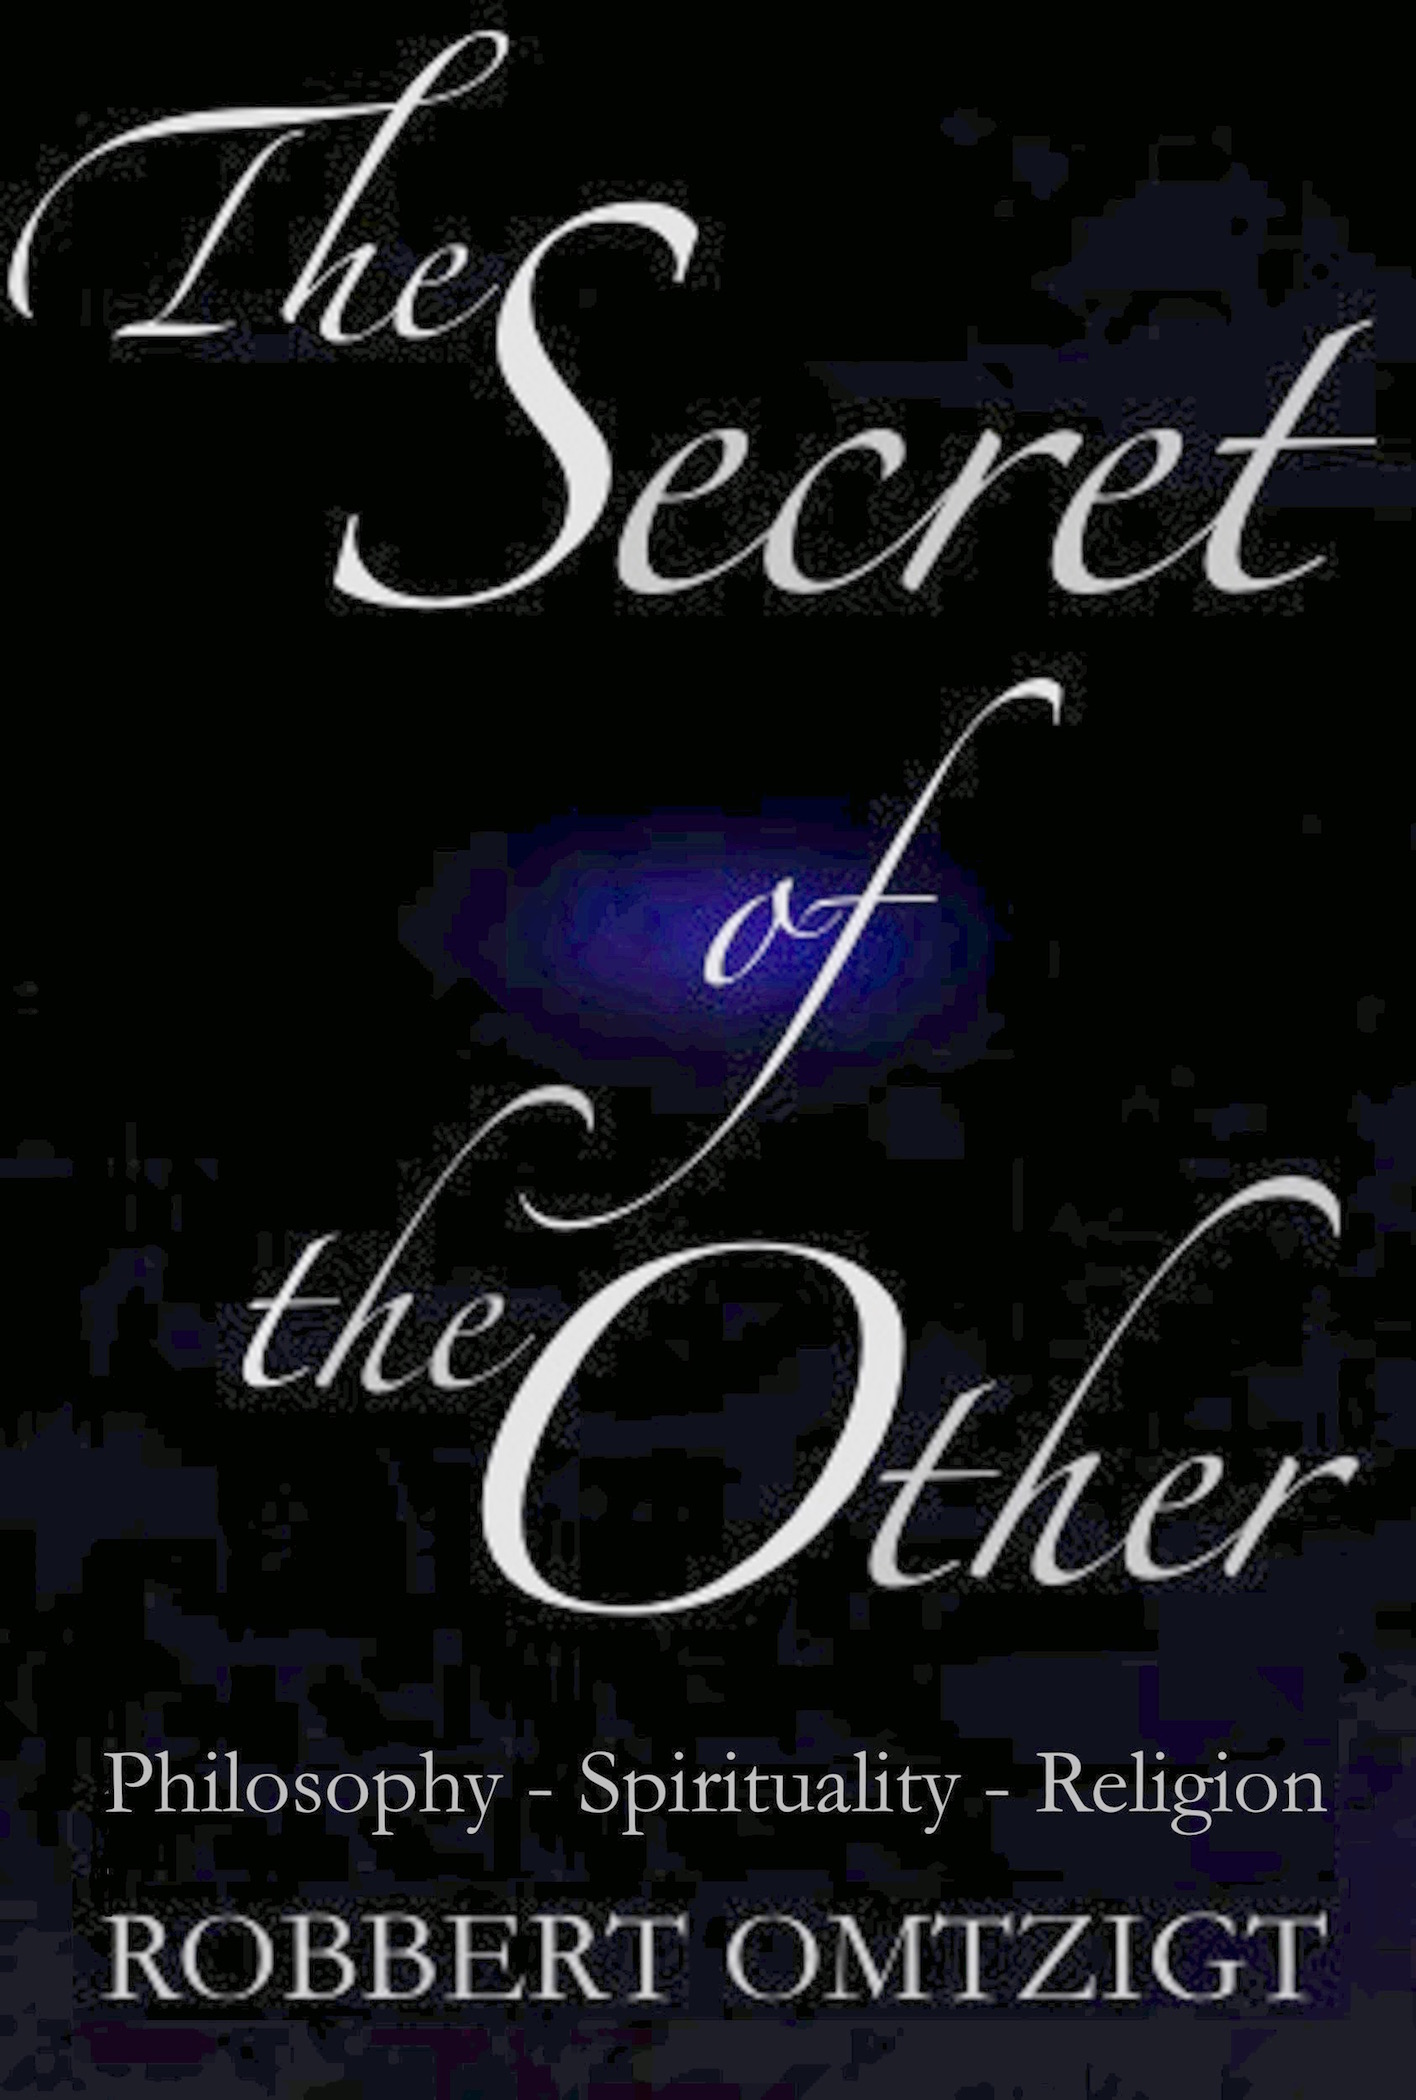 E-Book: The Secret  of the other by Robbert Omtzigt